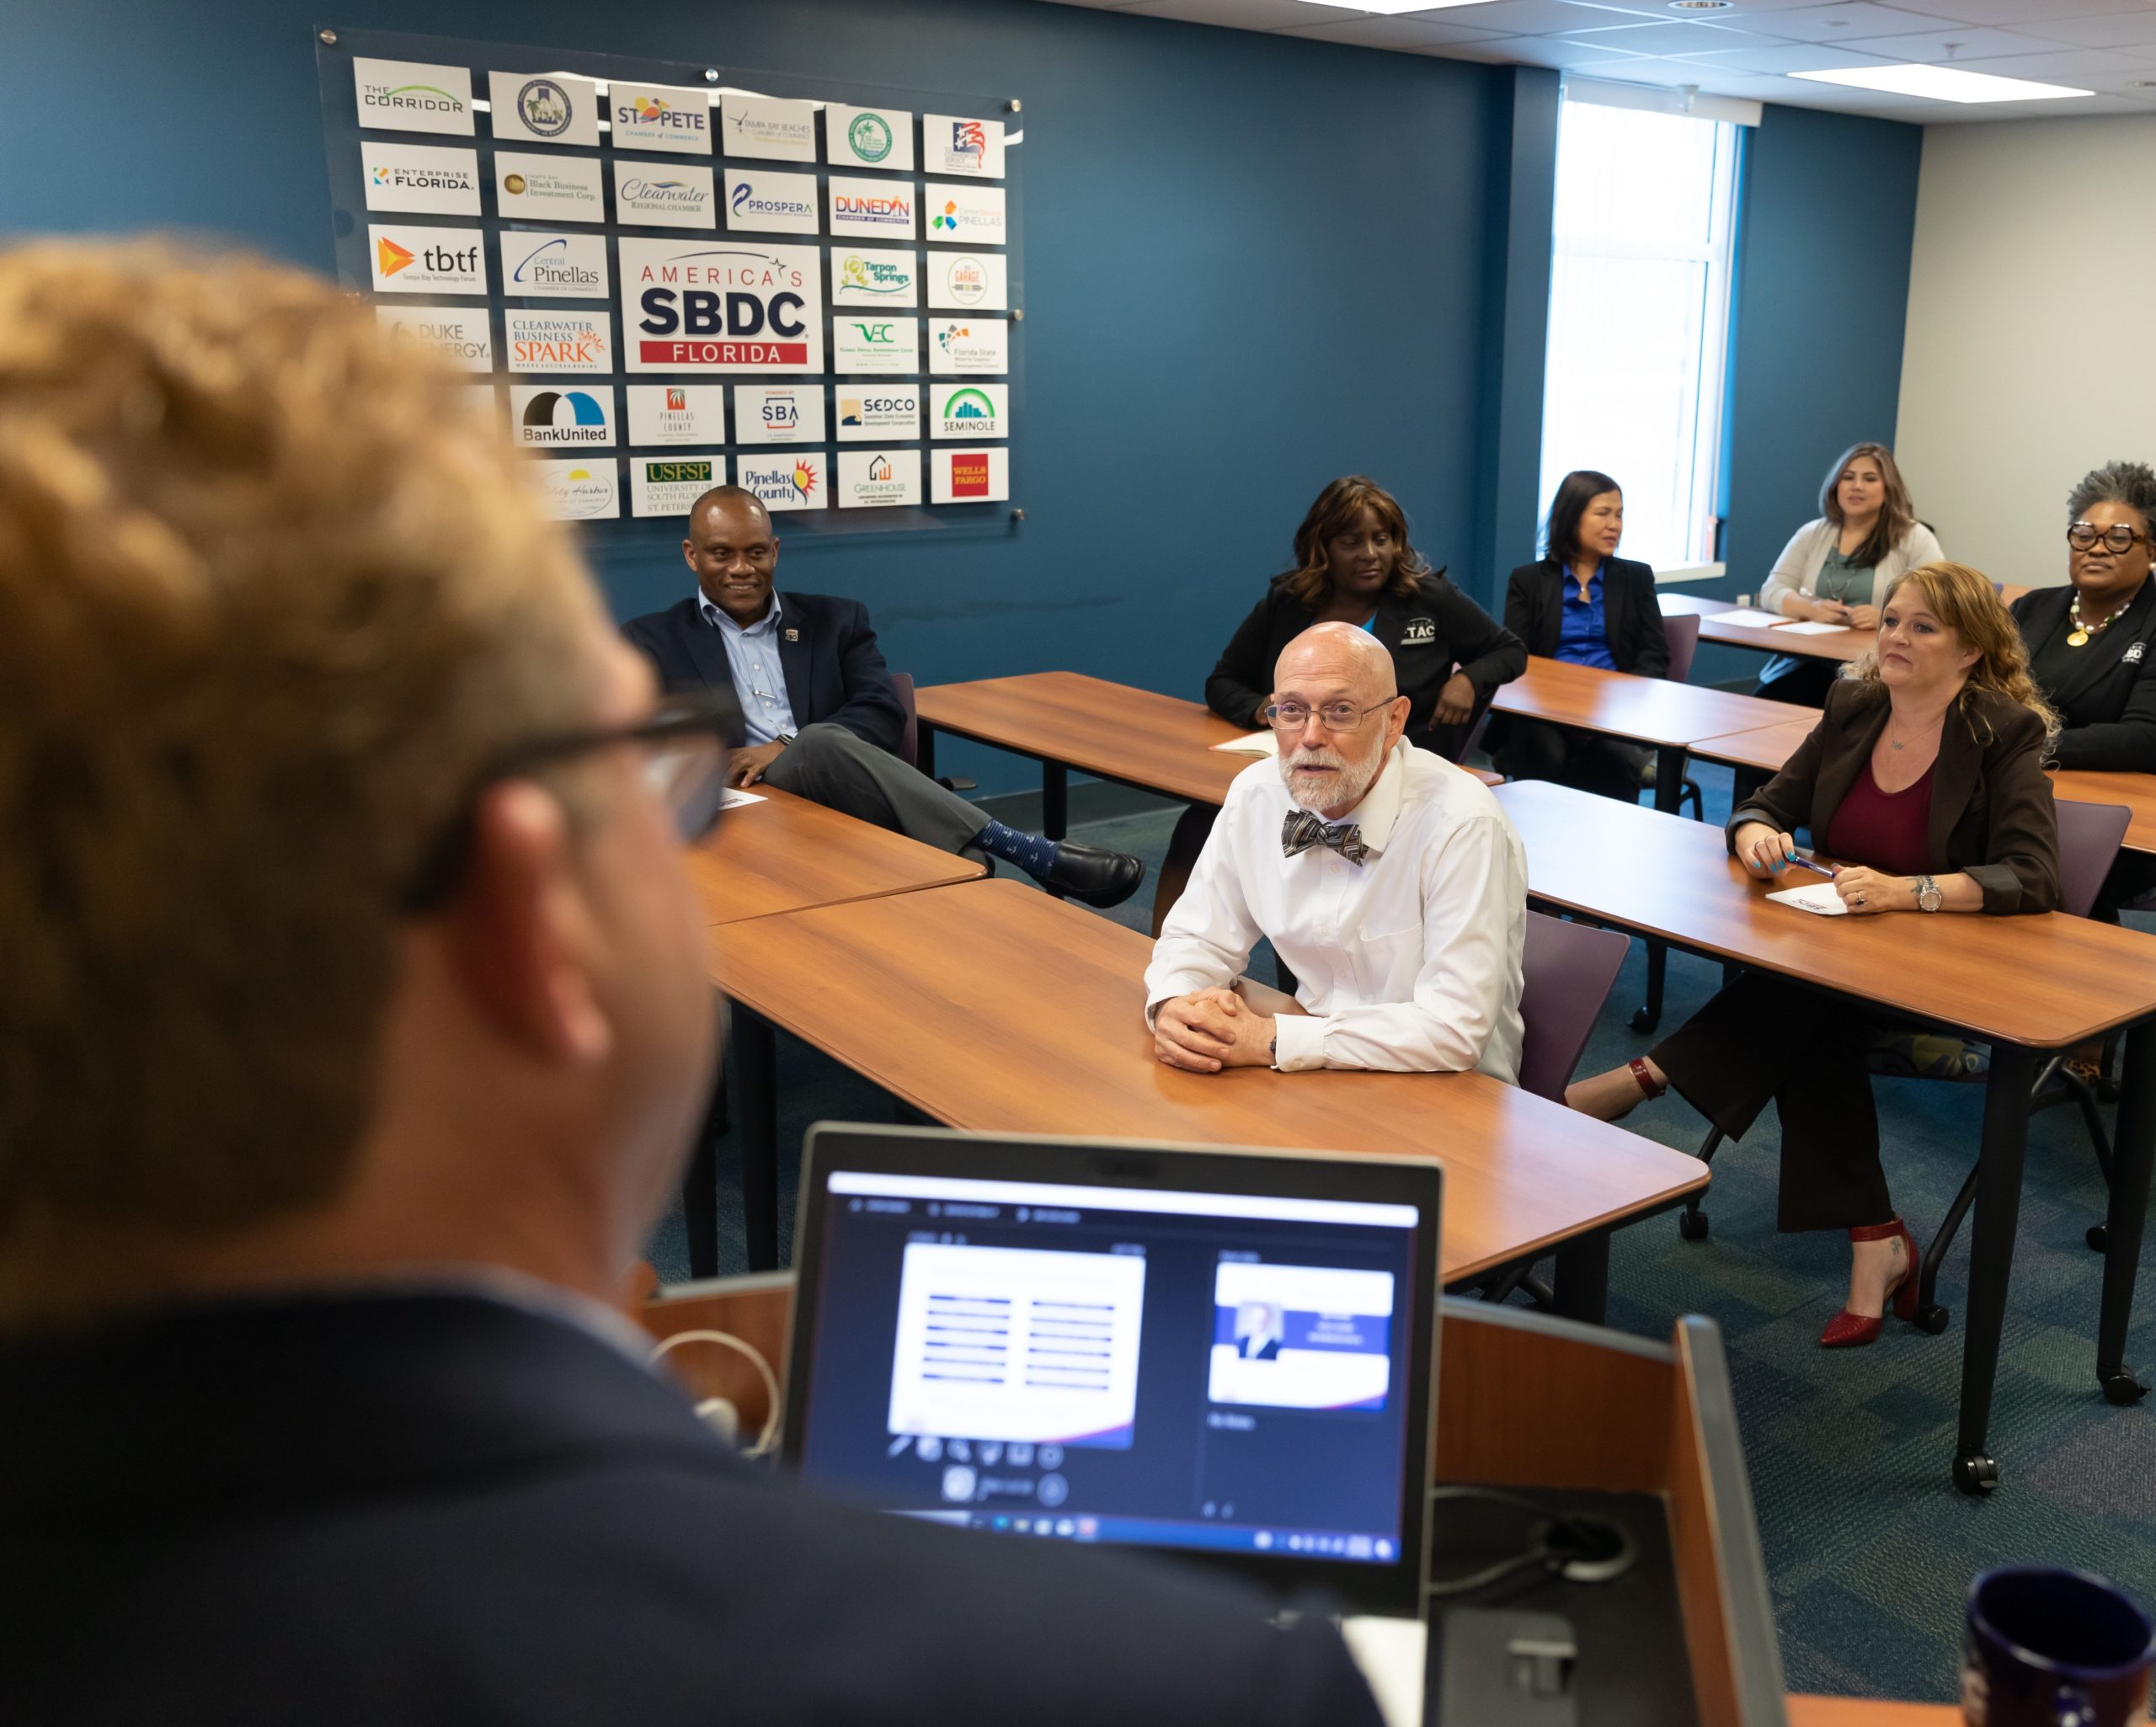 An image of a man leading a small business workshop in a meeting room with attendees at conference tables giving attention to the presenter.